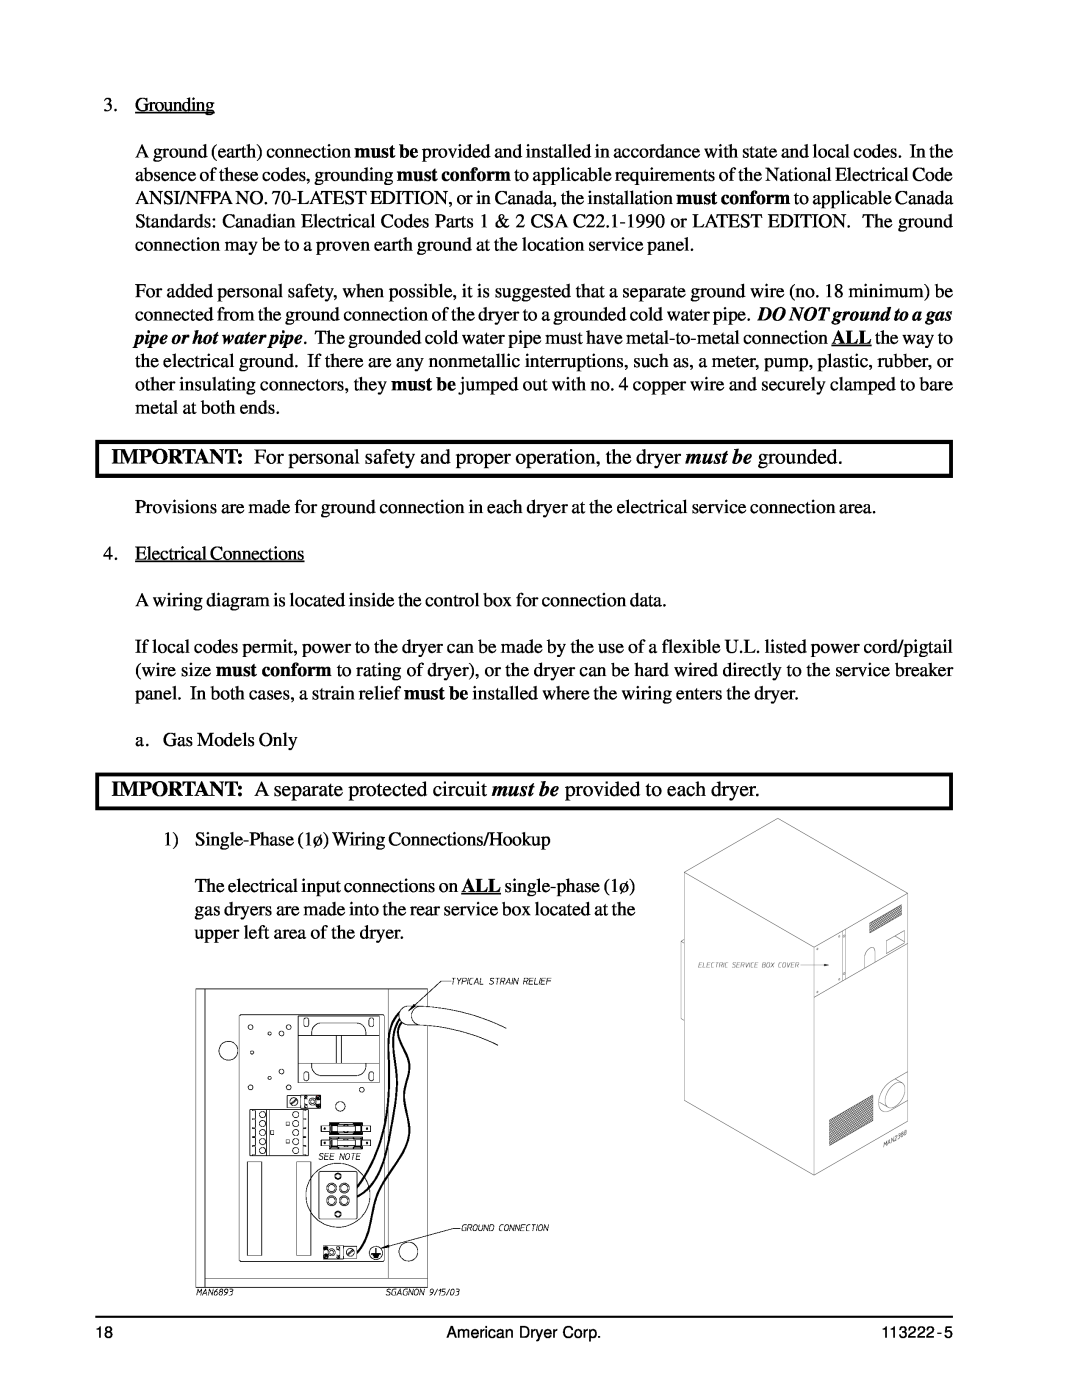 American Dryer Corp AD-24 Phase 7 installation manual IMPORTANT A separate protected circuit must be provided to each dryer 